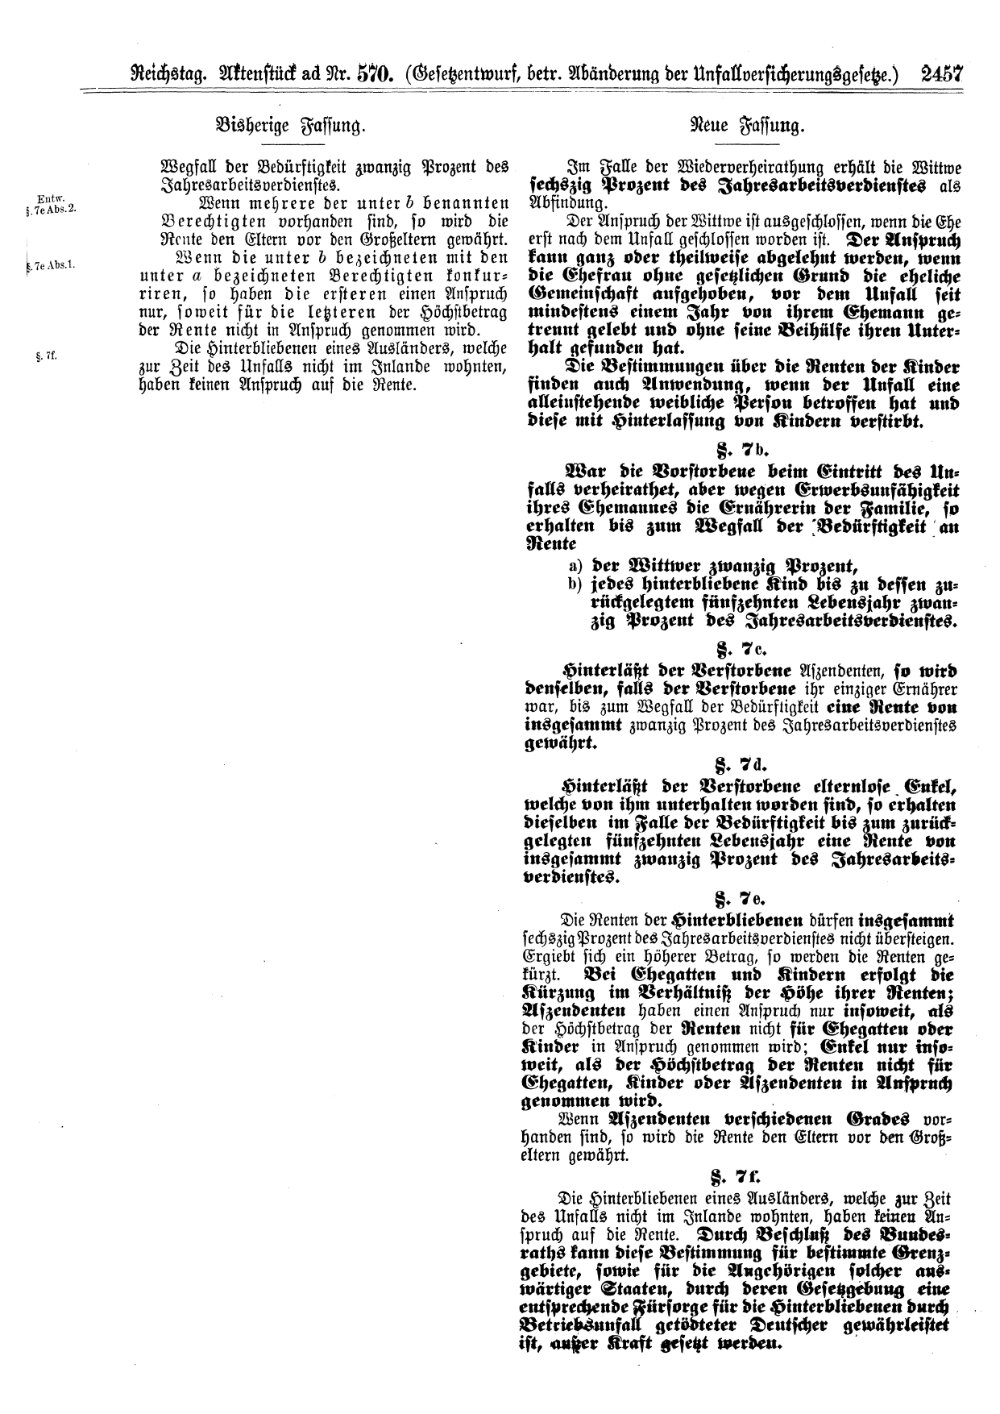 Scan of page 2457